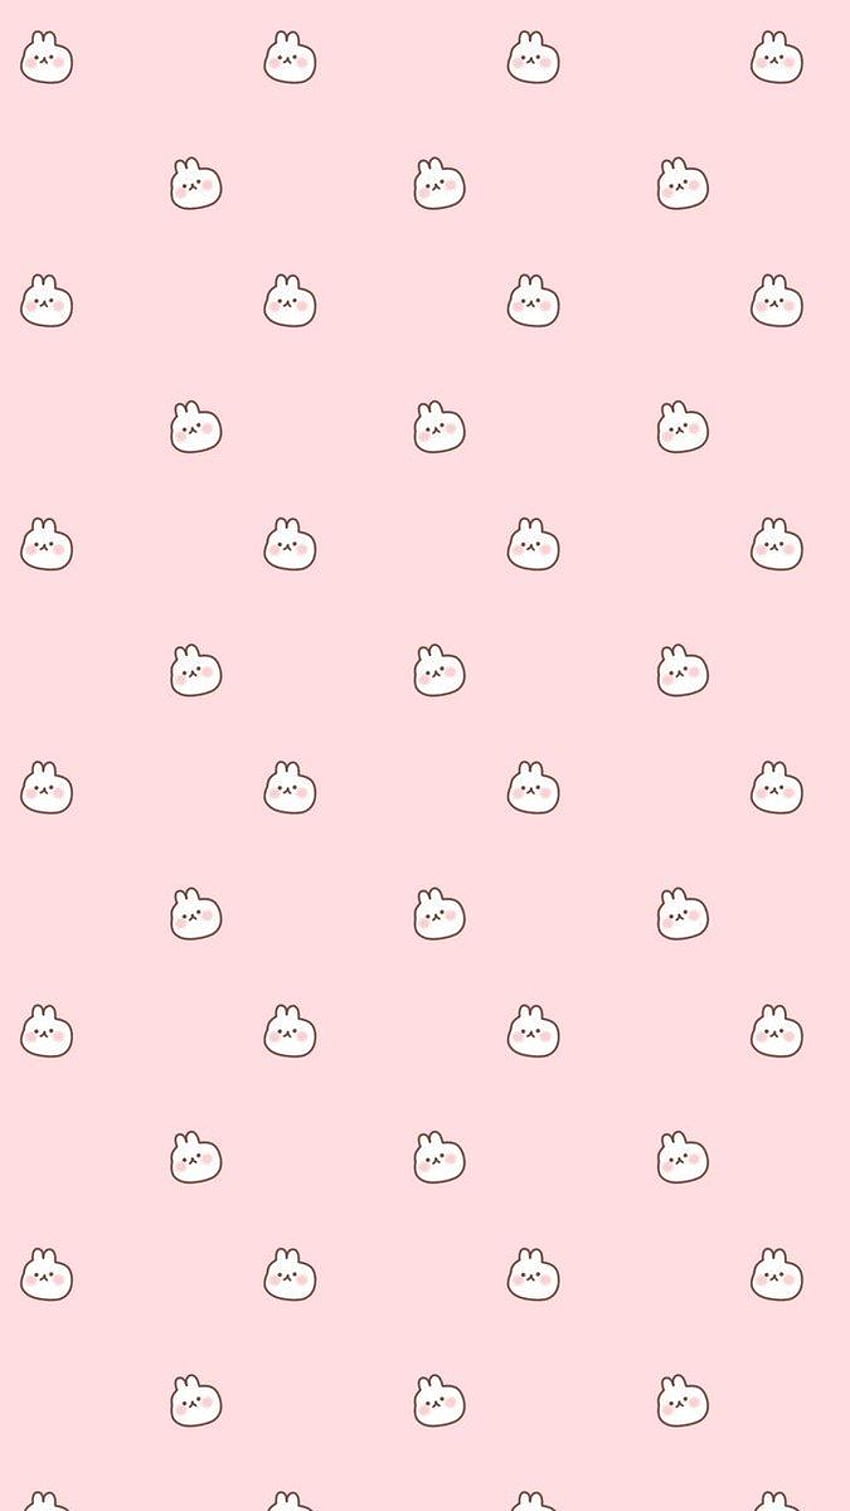 Pastel Pink Fabric Wallpaper and Home Decor  Spoonflower